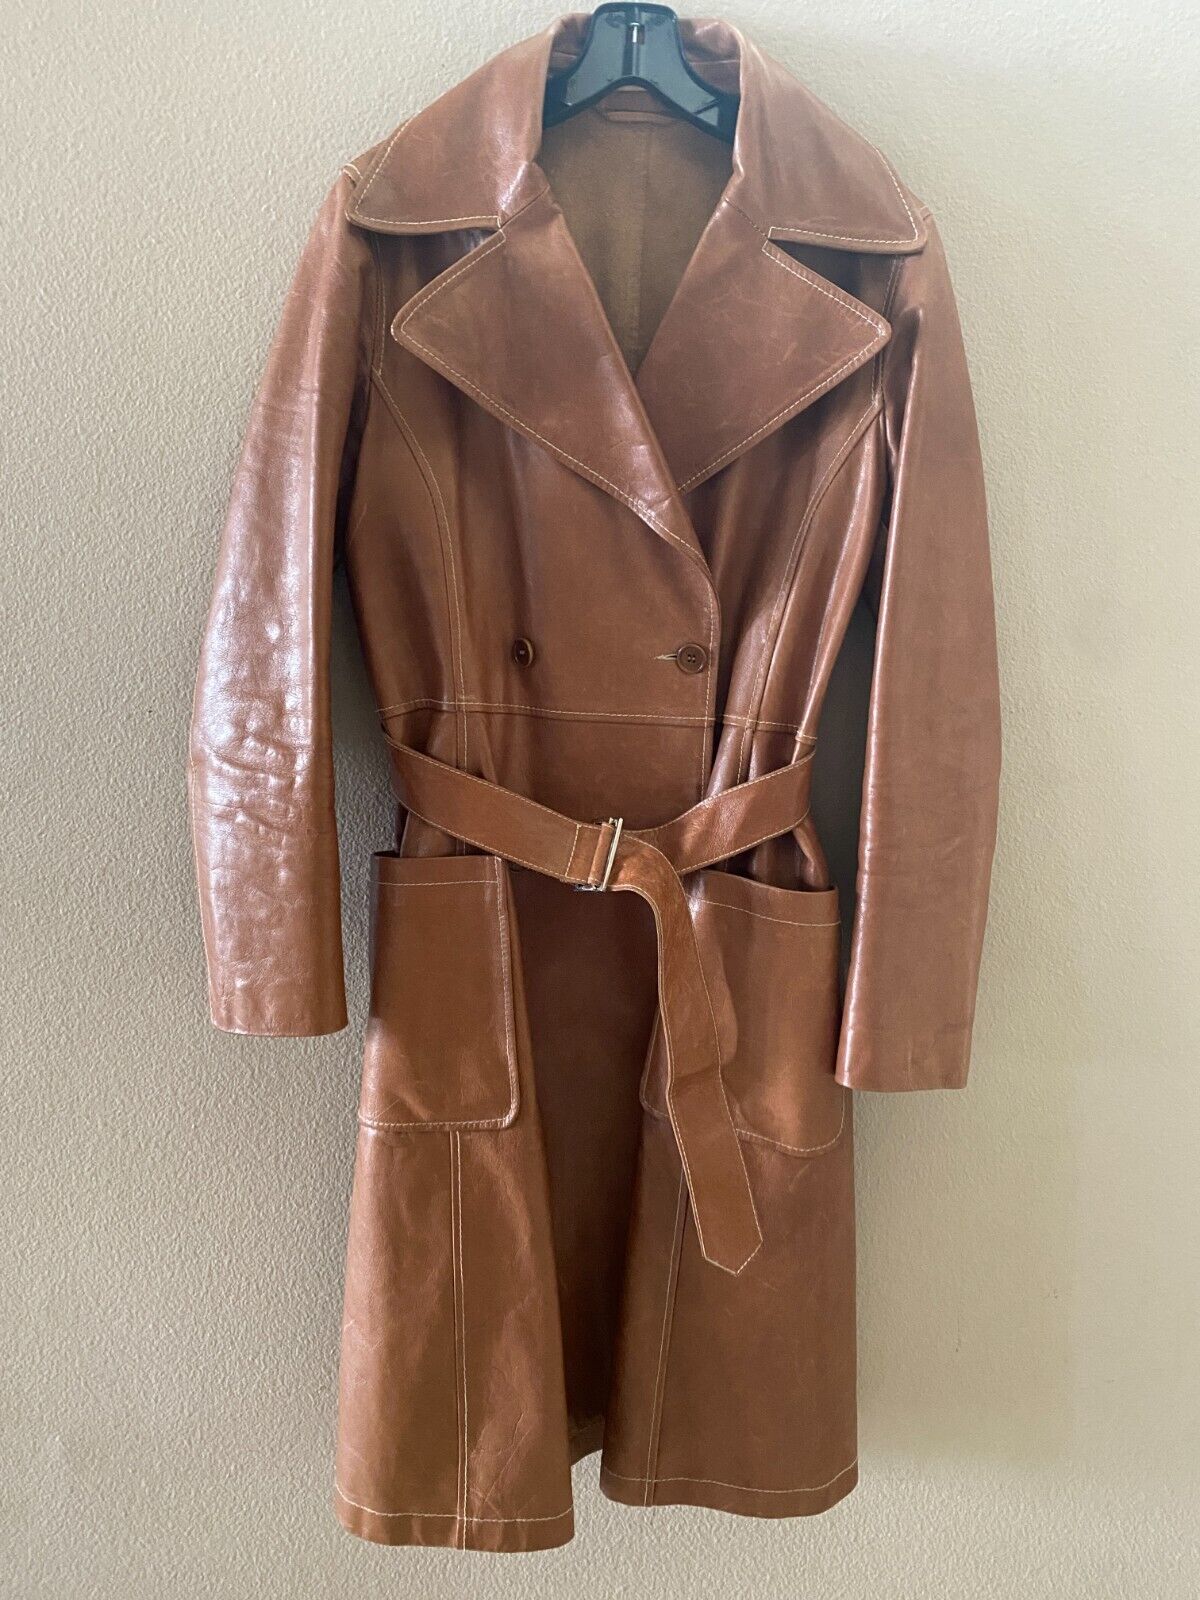 BALLY Leather Trench Belted Coat Camel Tan SZ 40/6 $2,995 EUC